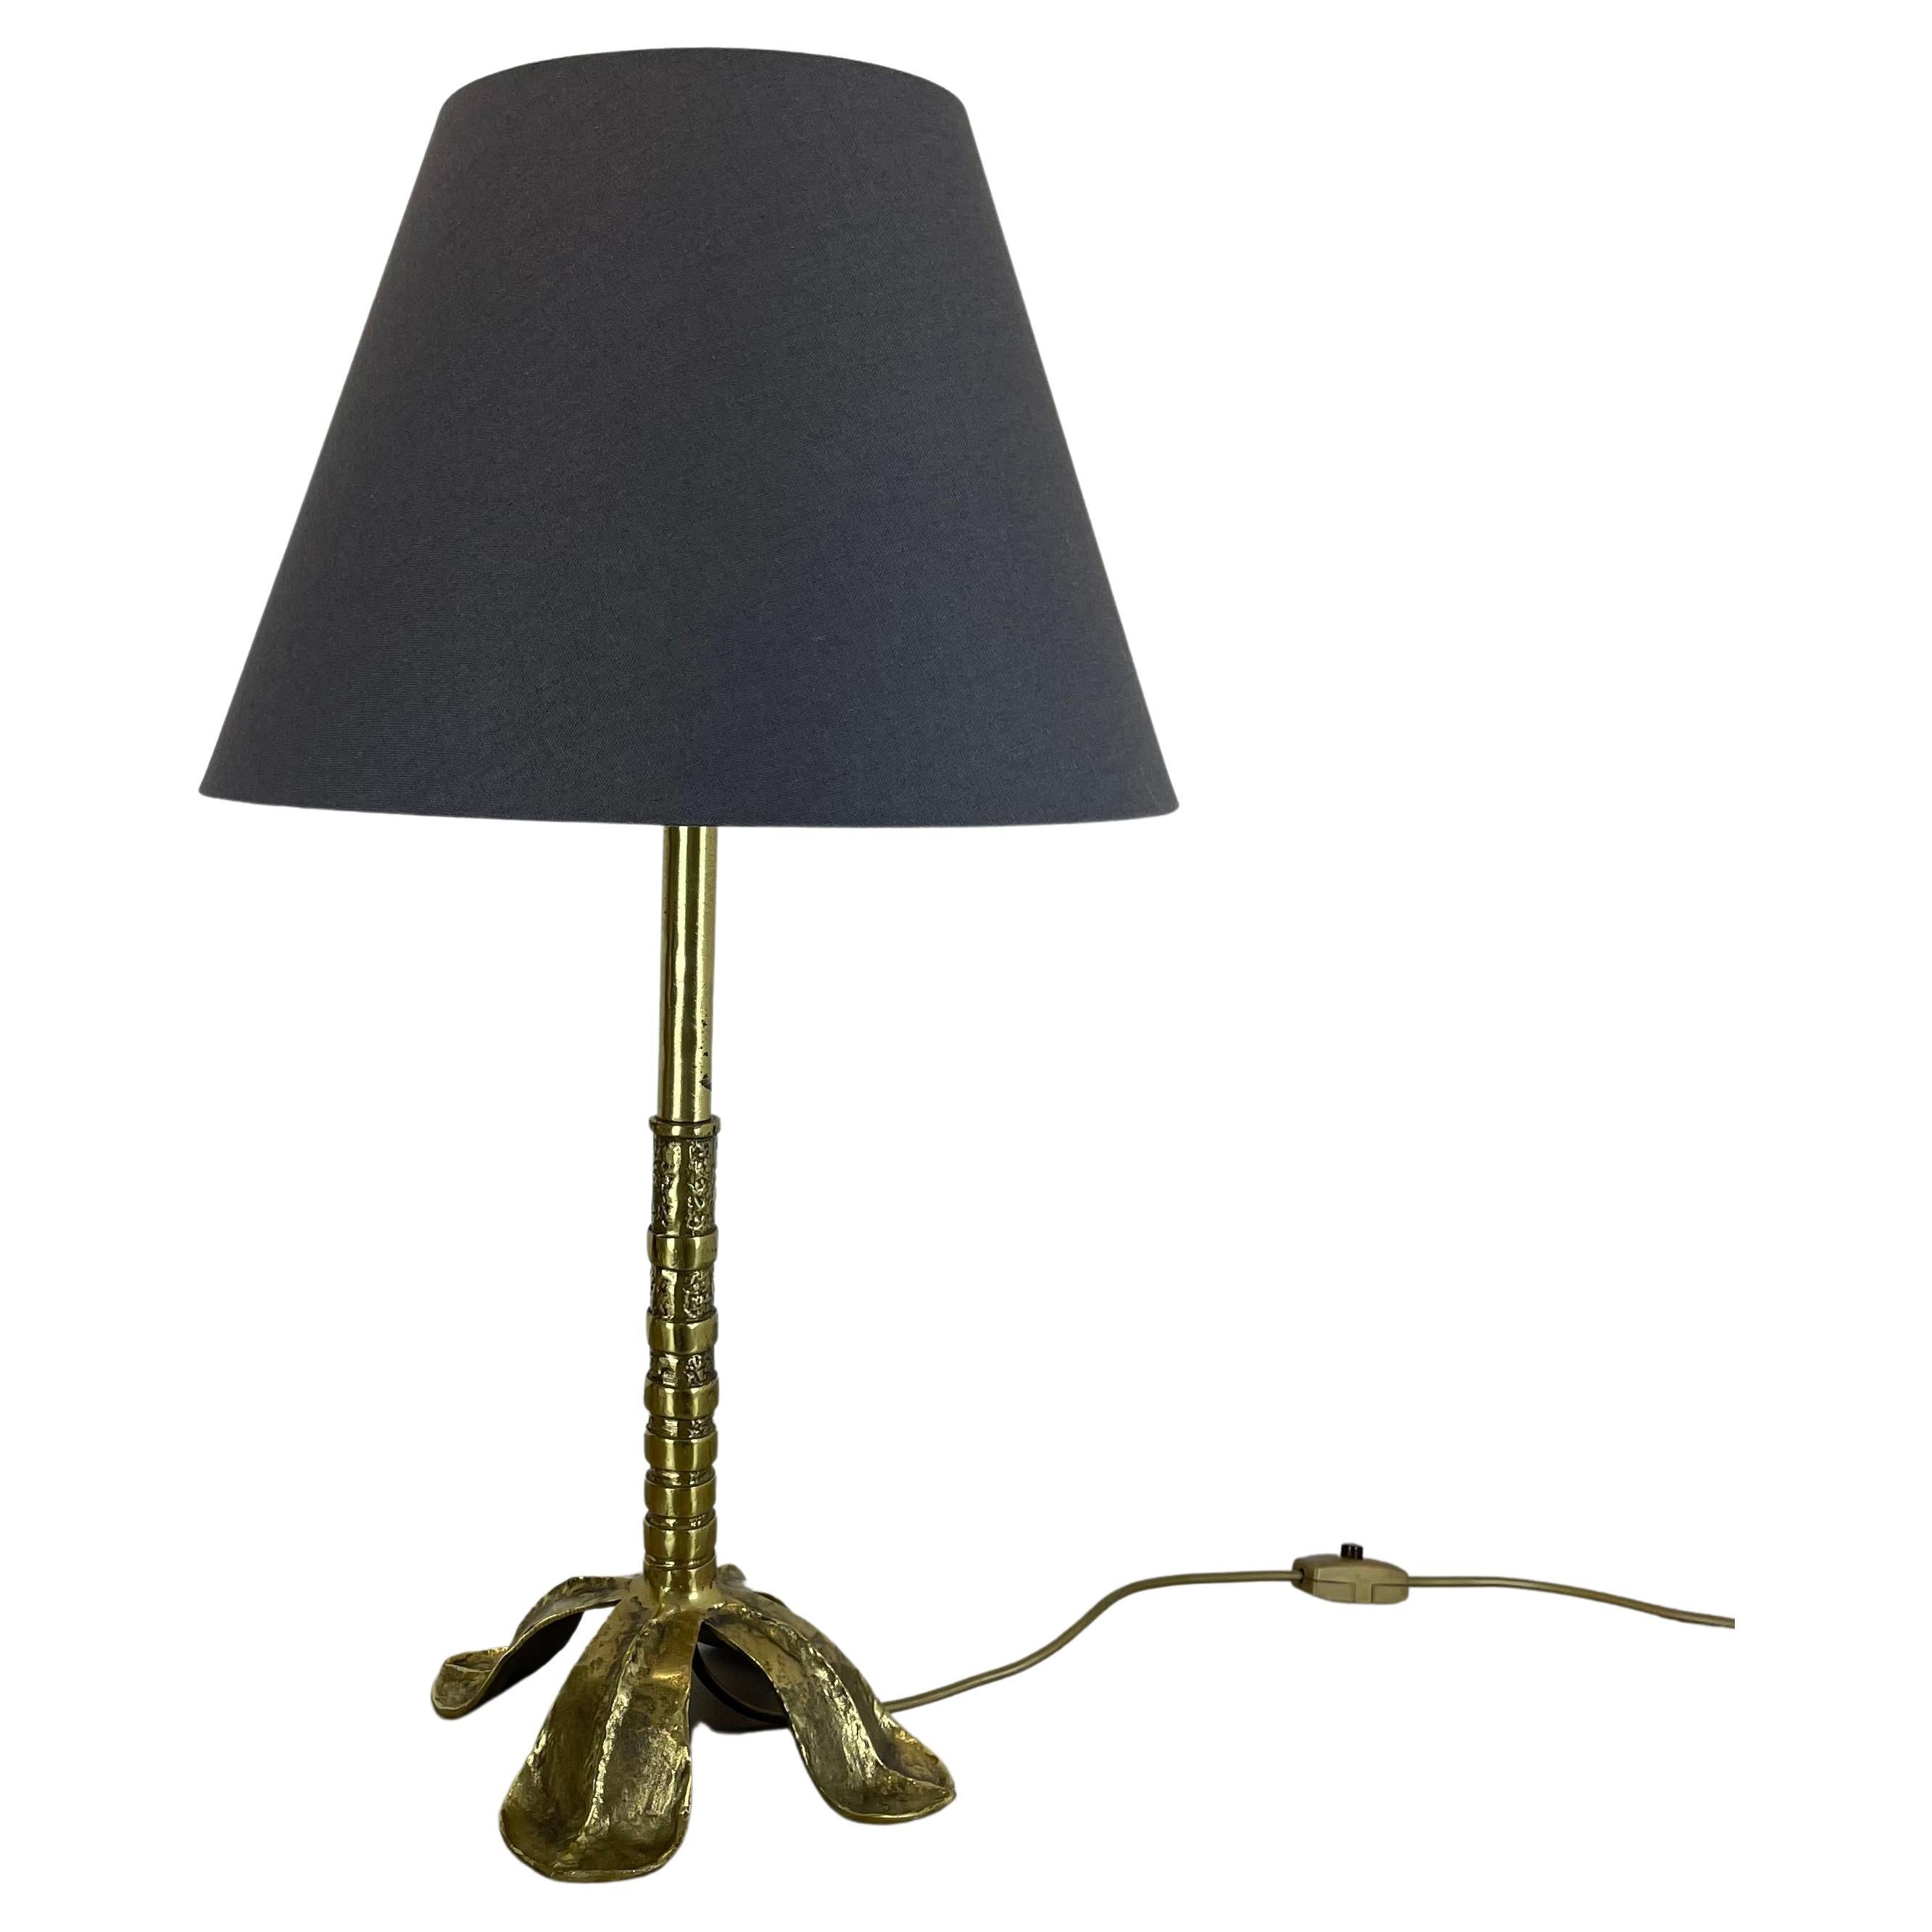 Original Hollywood Regency Style Floral Brutalist Brass Table Light, Italy 1970s For Sale